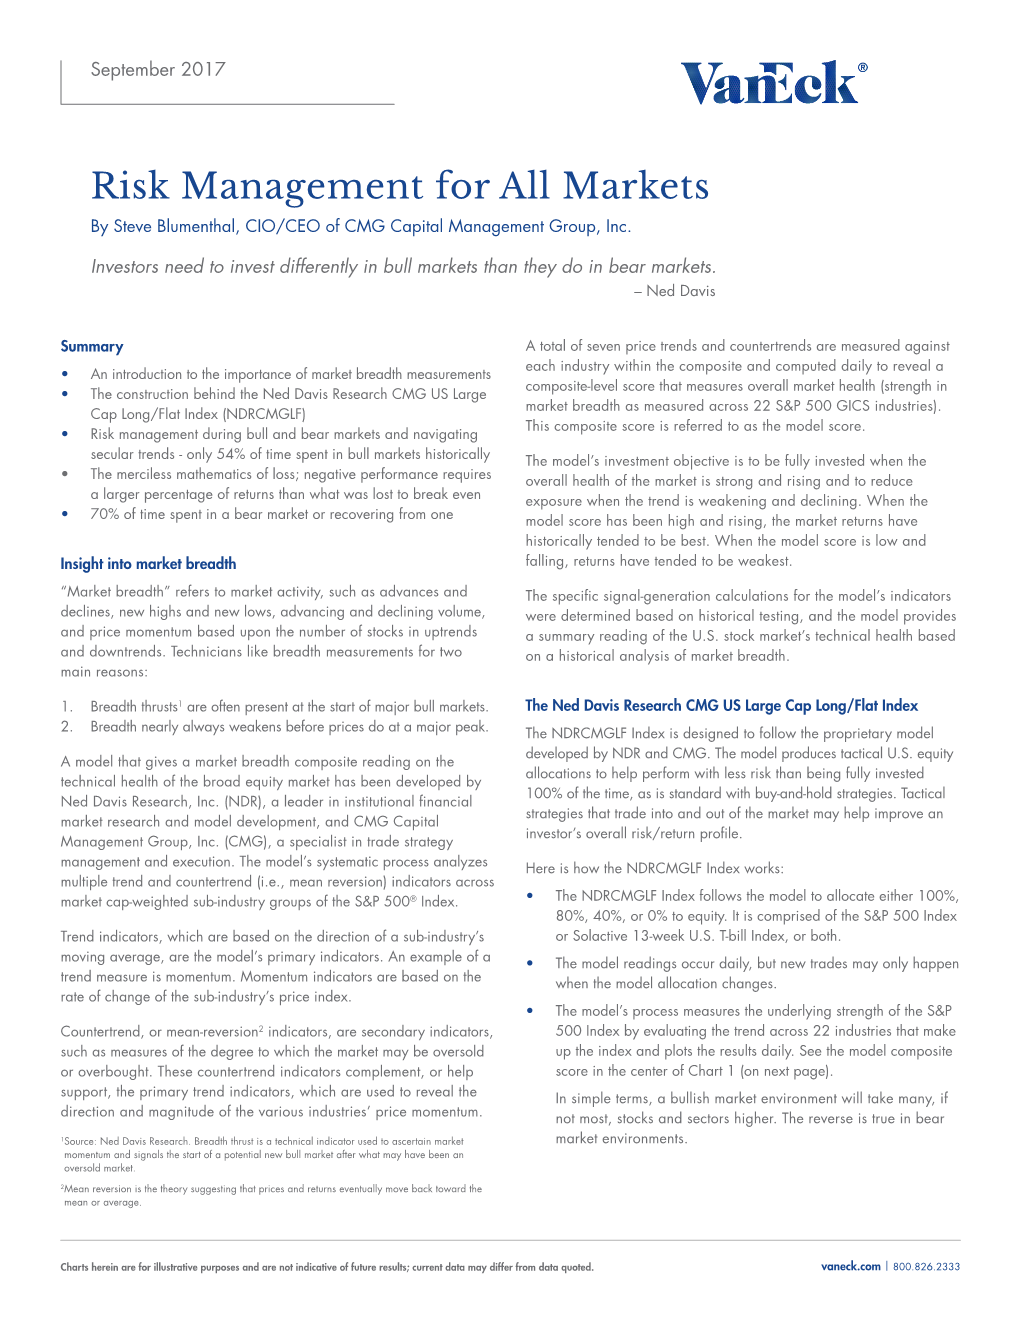 Risk Management for All Markets by Steve Blumenthal, CIO/CEO of CMG Capital Management Group, Inc